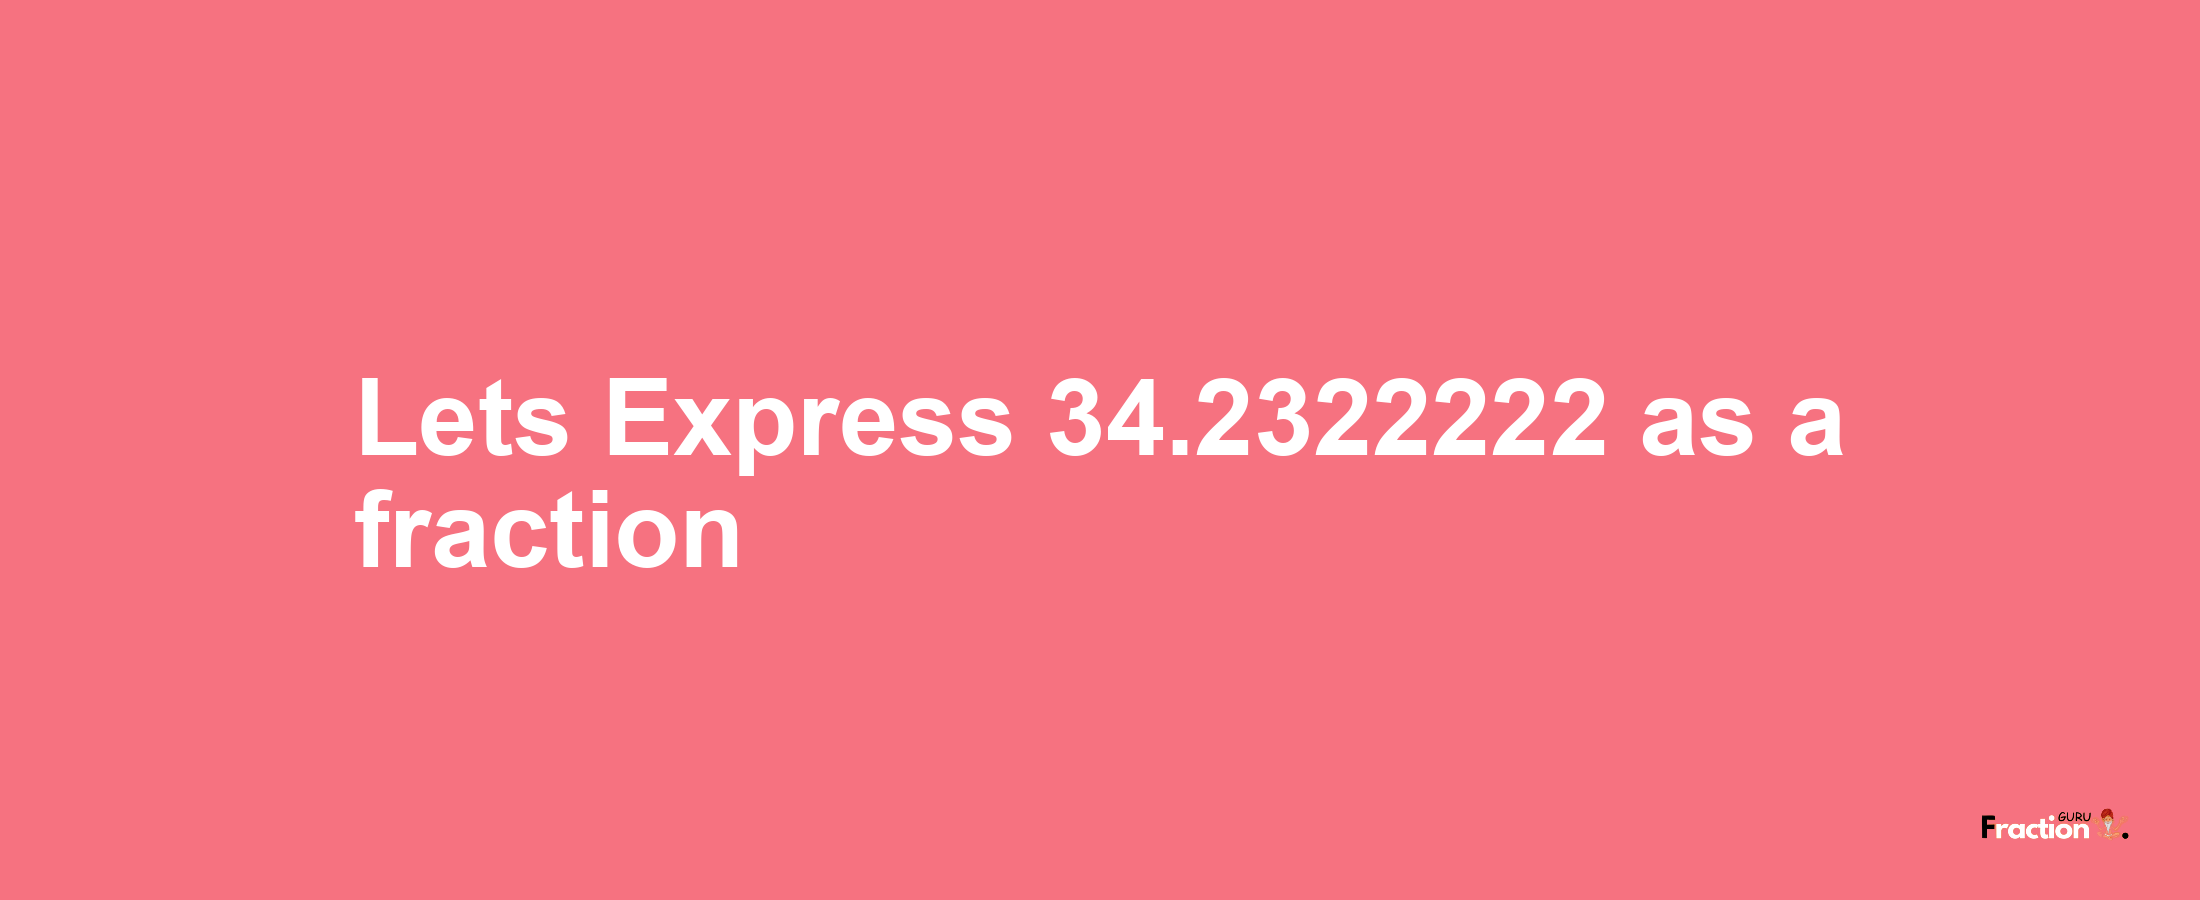 Lets Express 34.2322222 as afraction